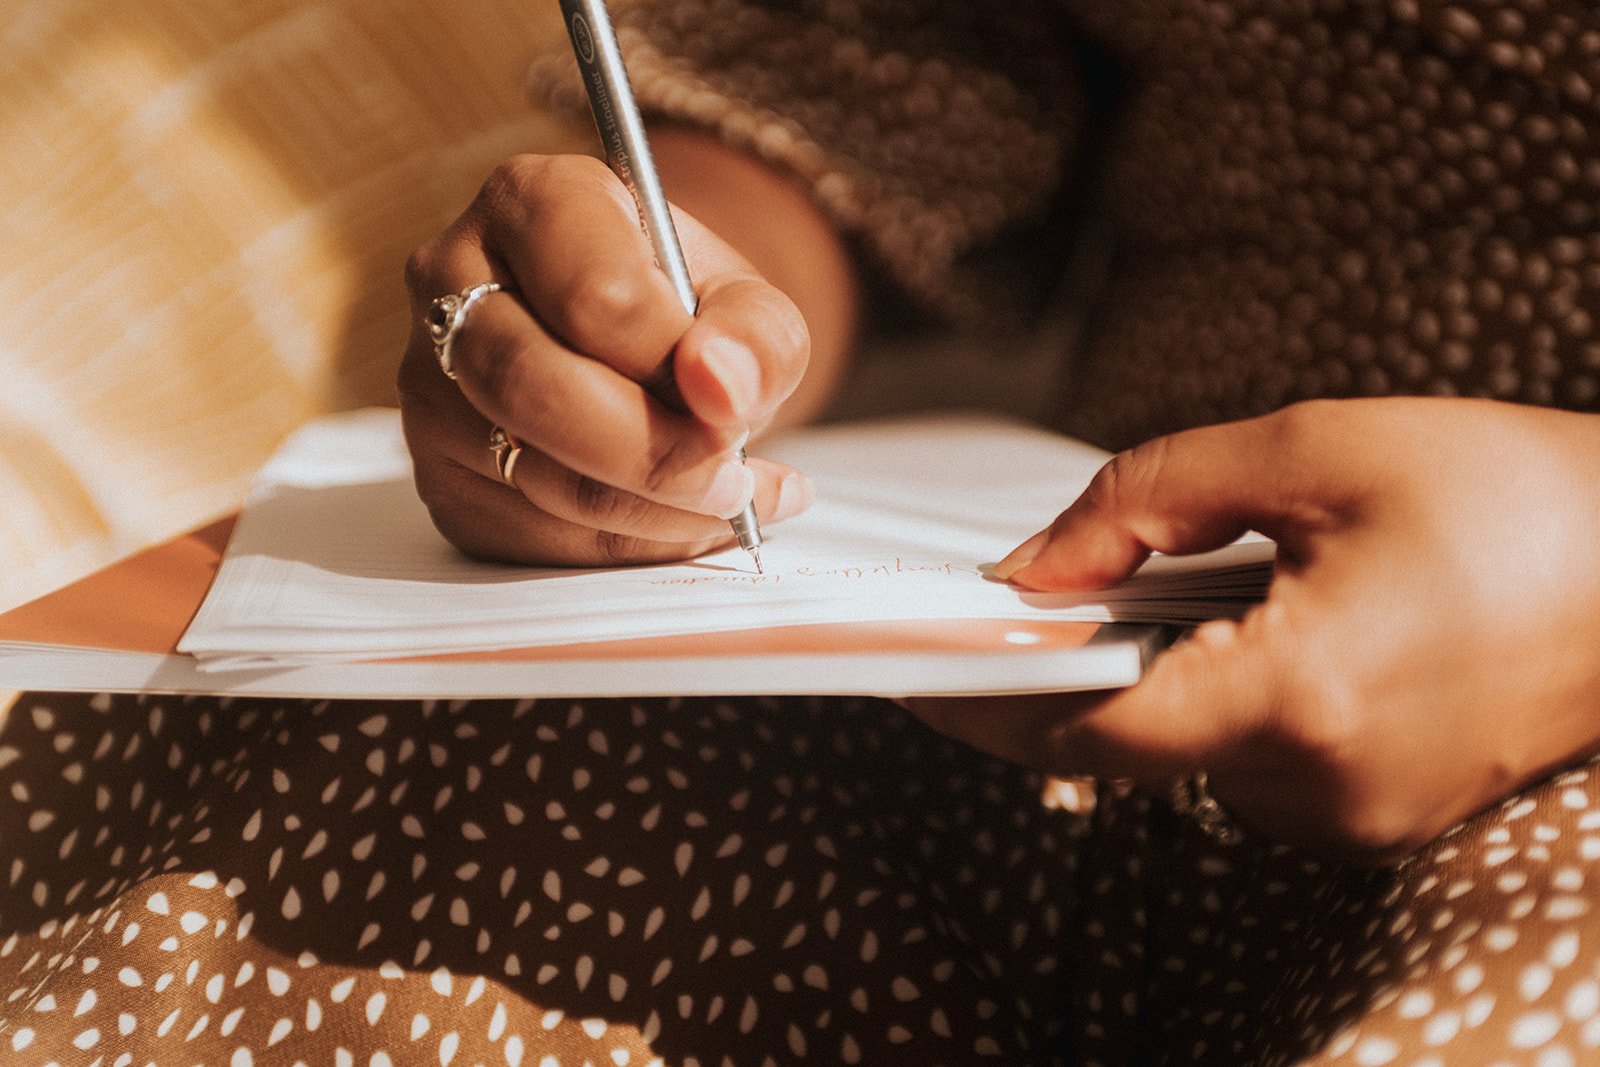 a closeup image of a brown hand holding a pen against a notebook